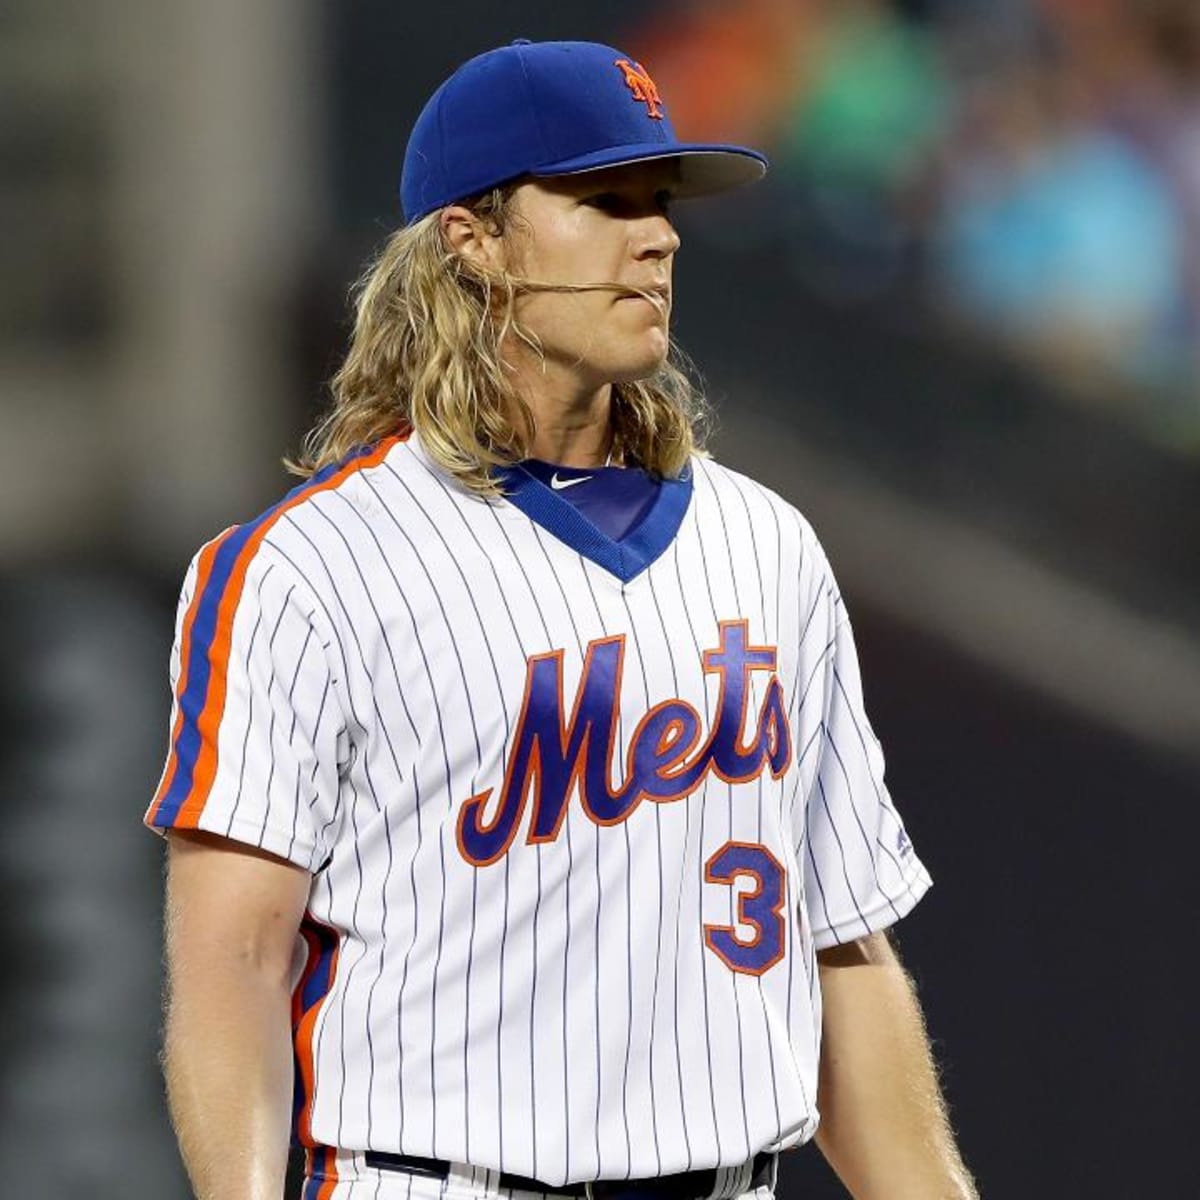 Noah Syndergaard ejected for pitch behind Chase Utley - Sports